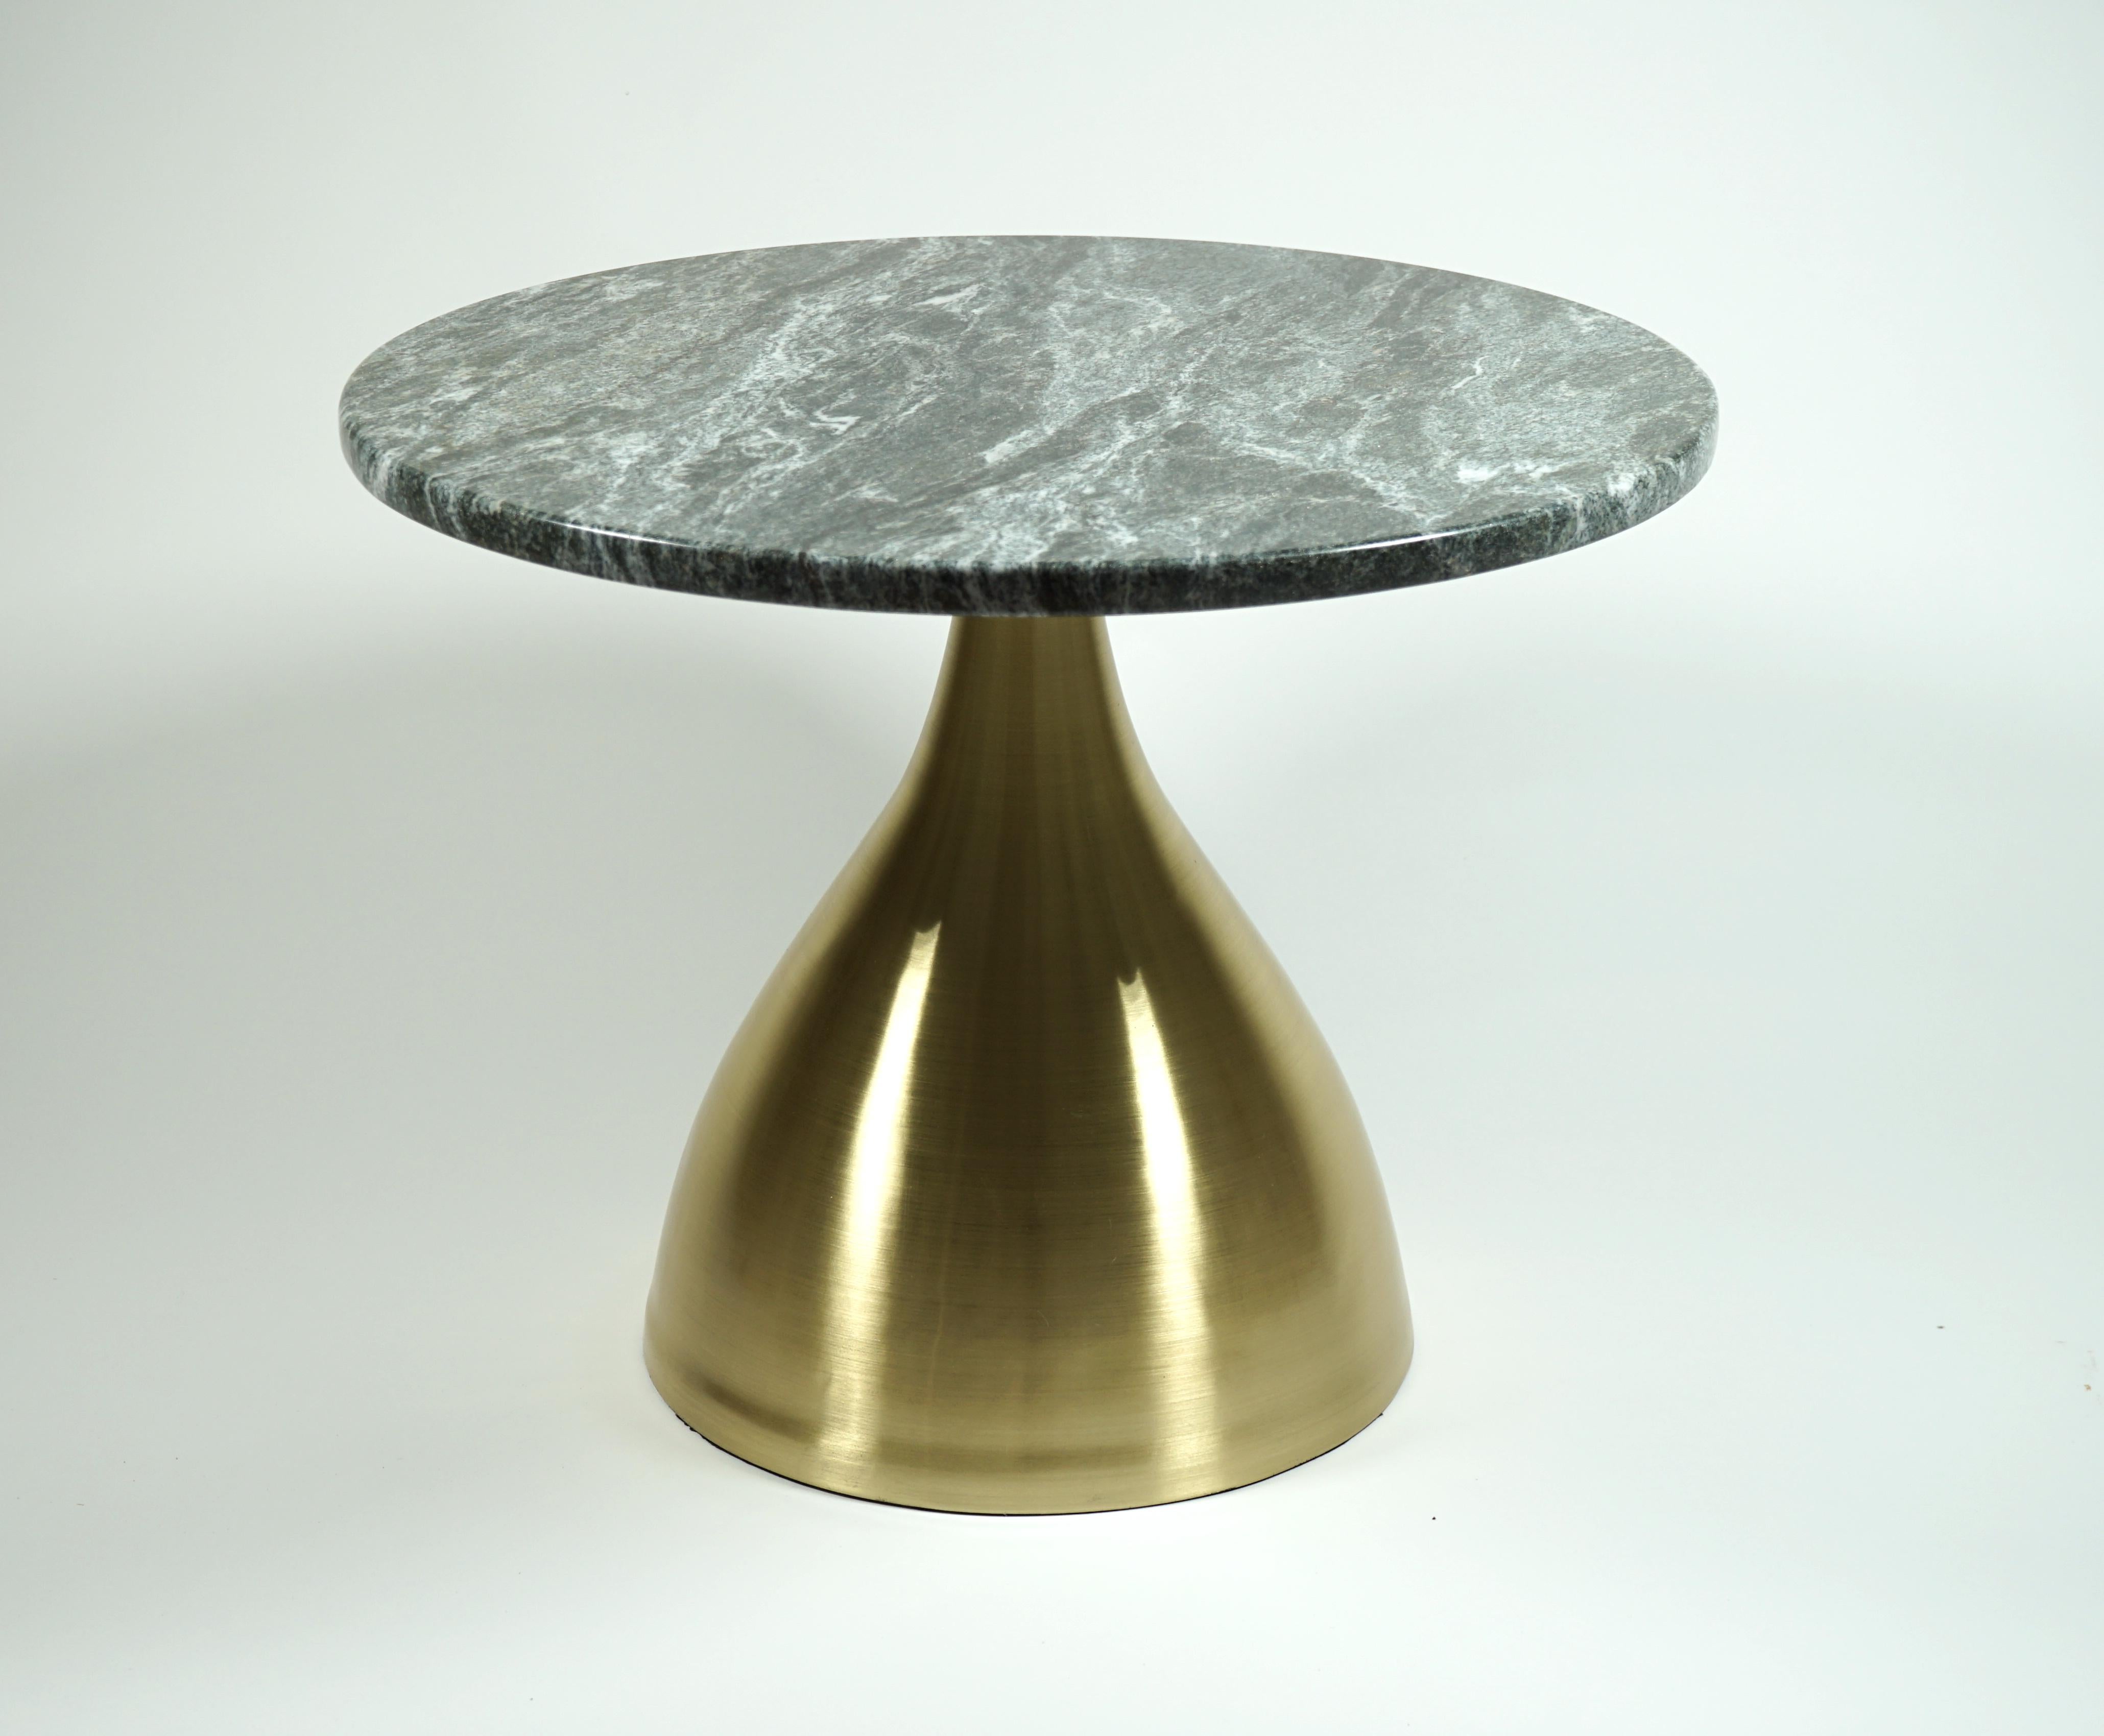 Coffee table model Mushroom designed by Studio Superego for Superego Editions.
Low Table handmade with satin brass leg and Jaco Green marble top.

Biography
Superego editions was born in 2006, performing a constant activity of research in decorative